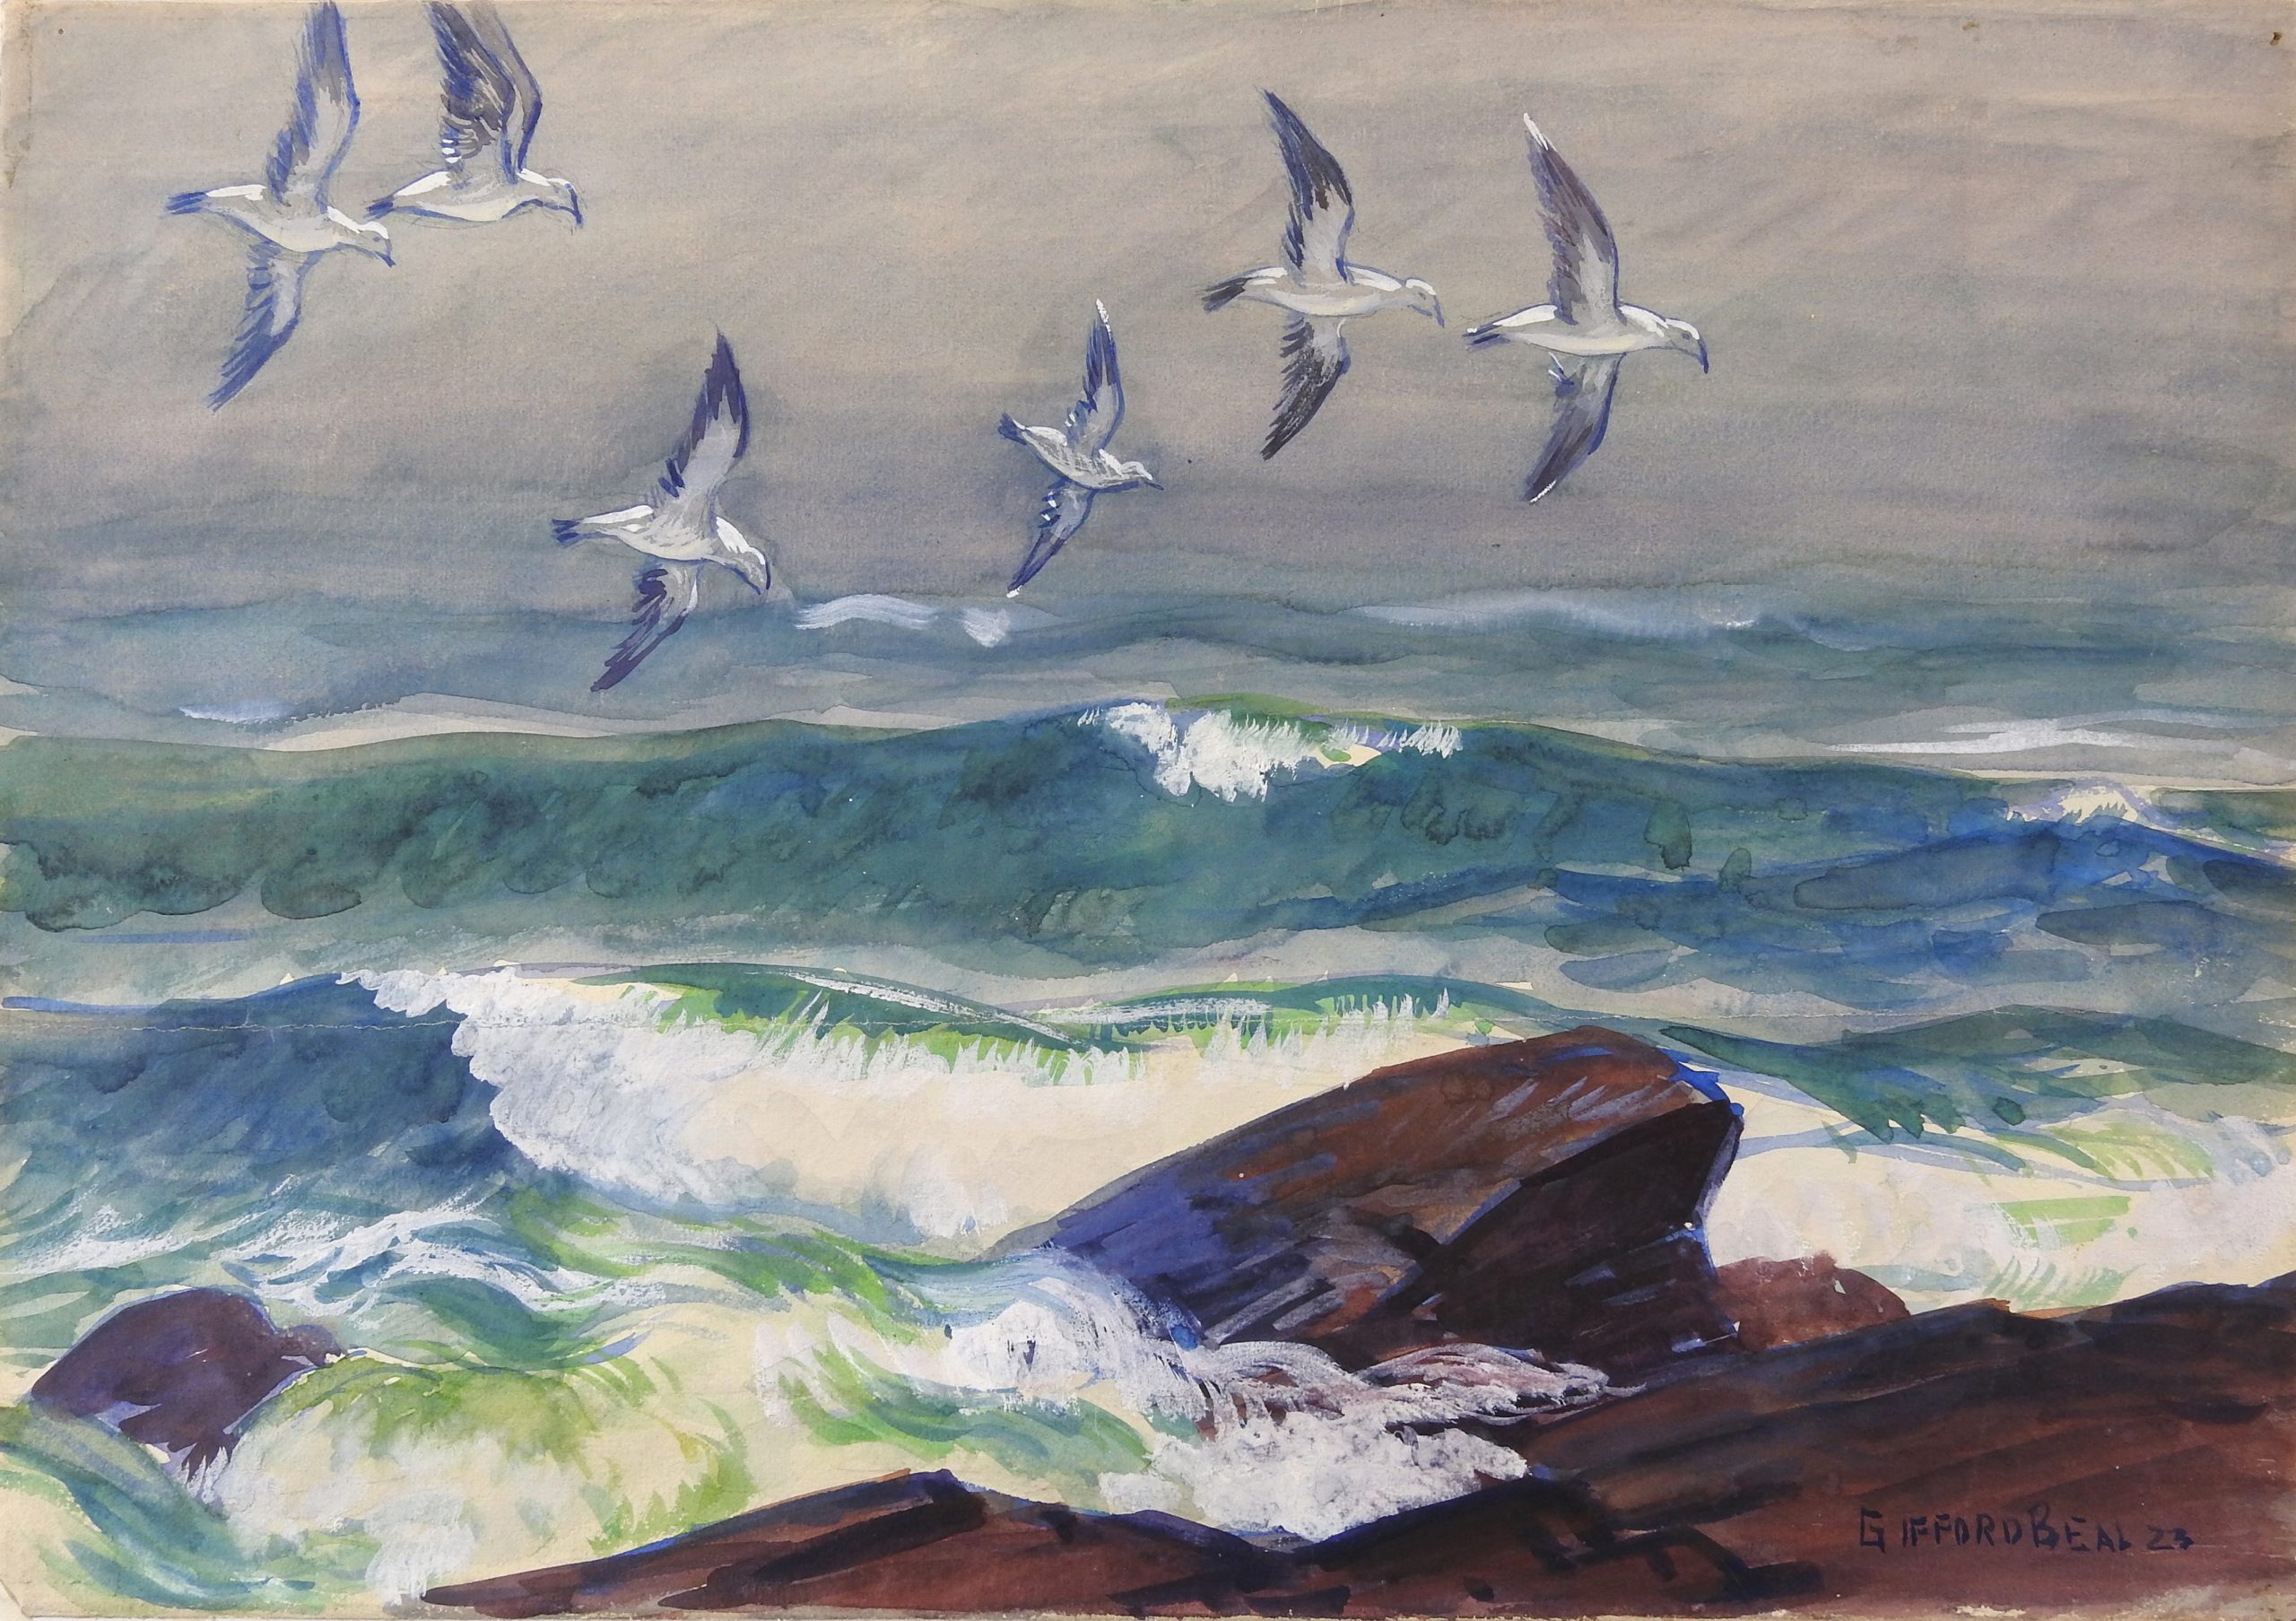 This is an image of a Gifford Beal painting with gulls above waves on the sea